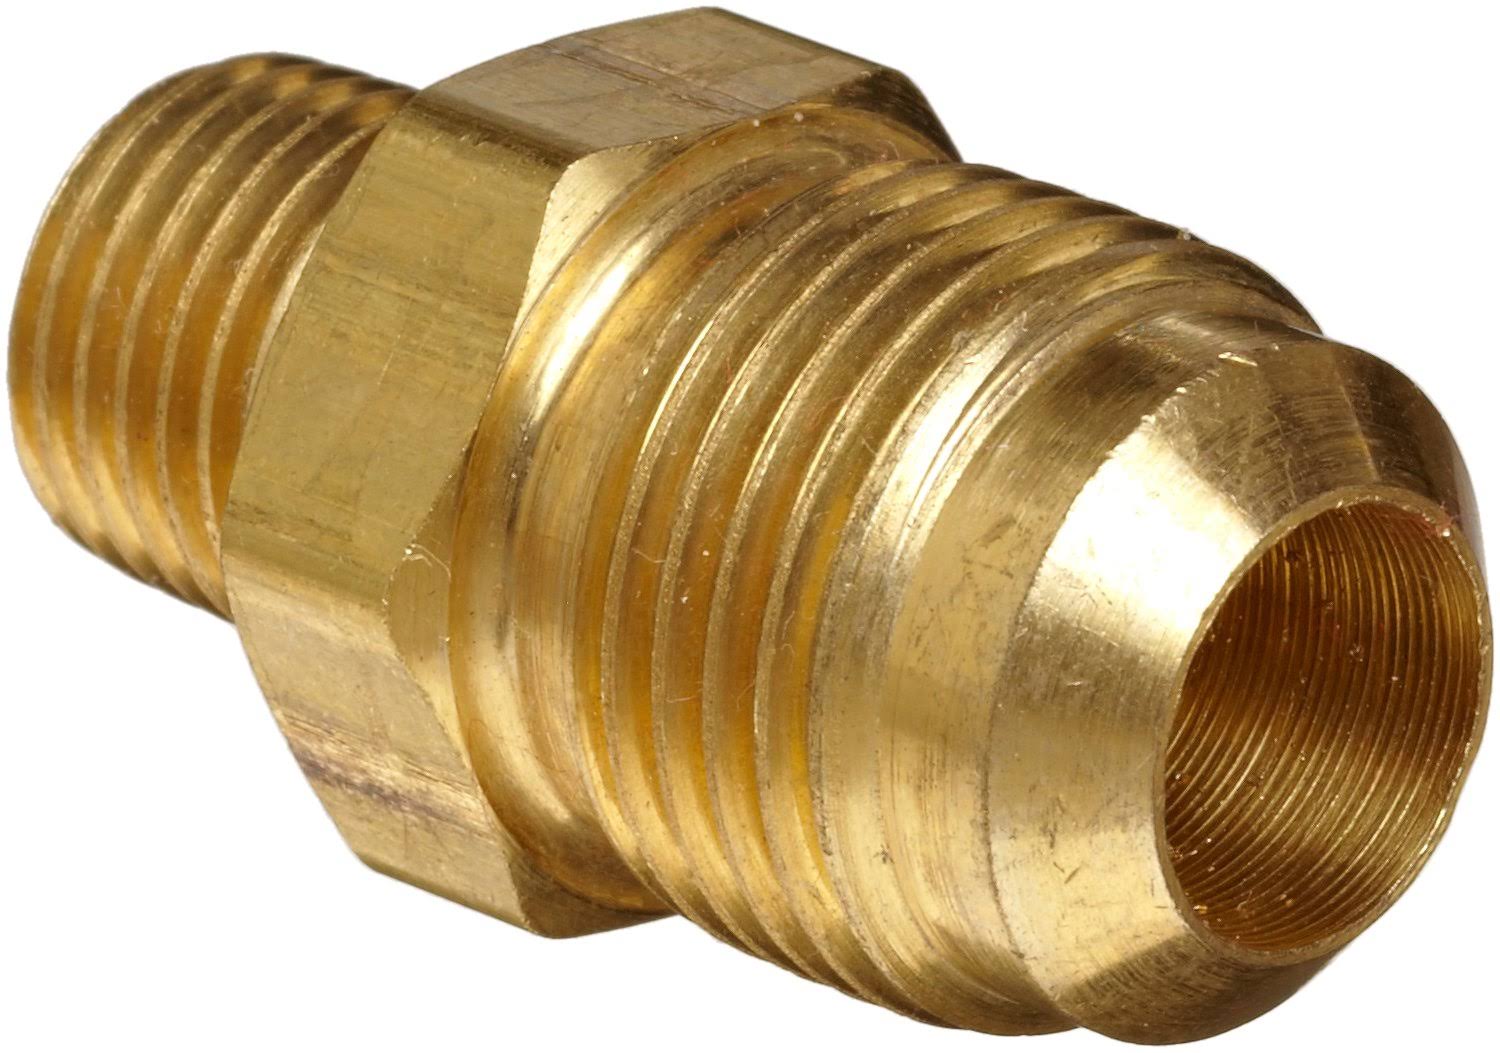 Anderson Metals Brass Tube Fitting - 3/8" x 1/8"